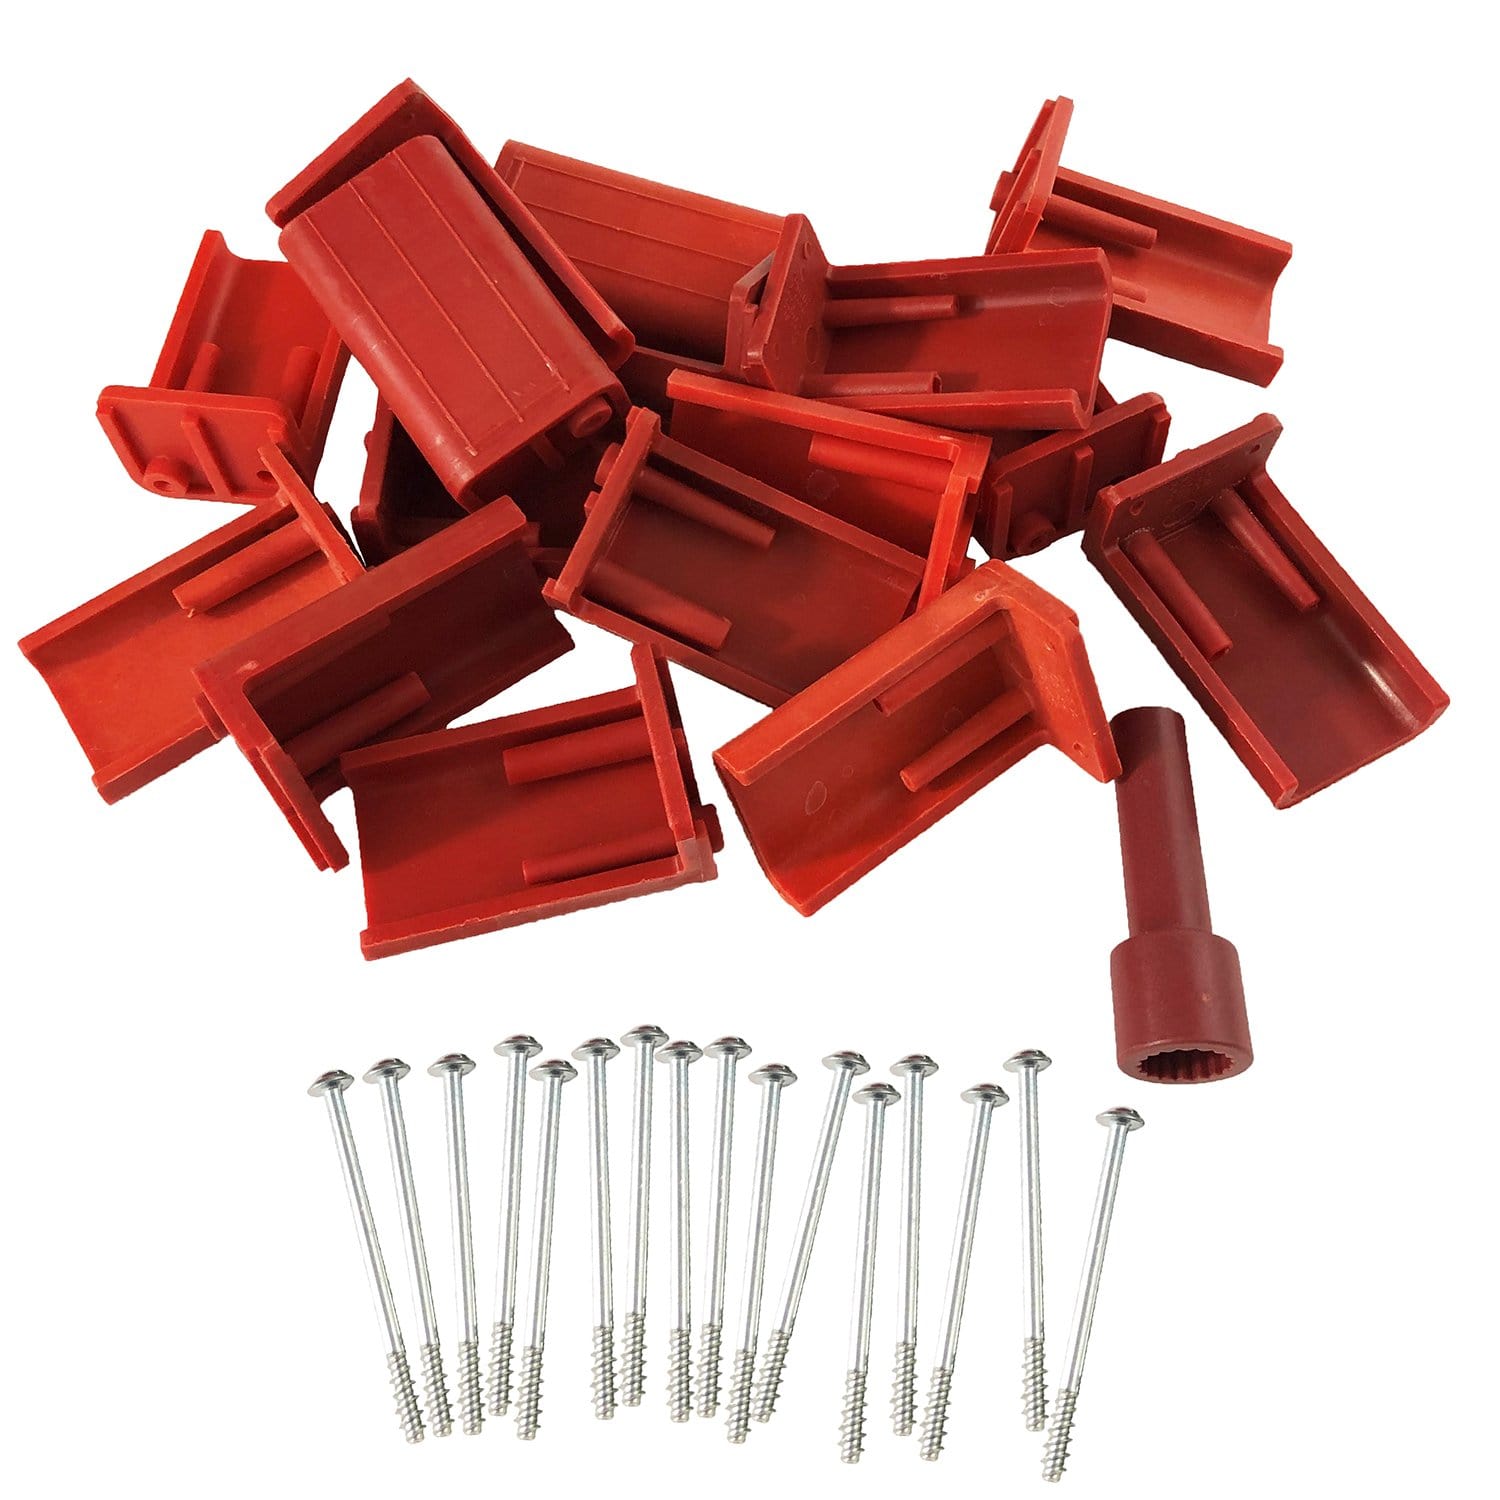 Dometic ZUB1351 Assembly Kit For Heki 2, 3 And 4, Red, 53-60 mm